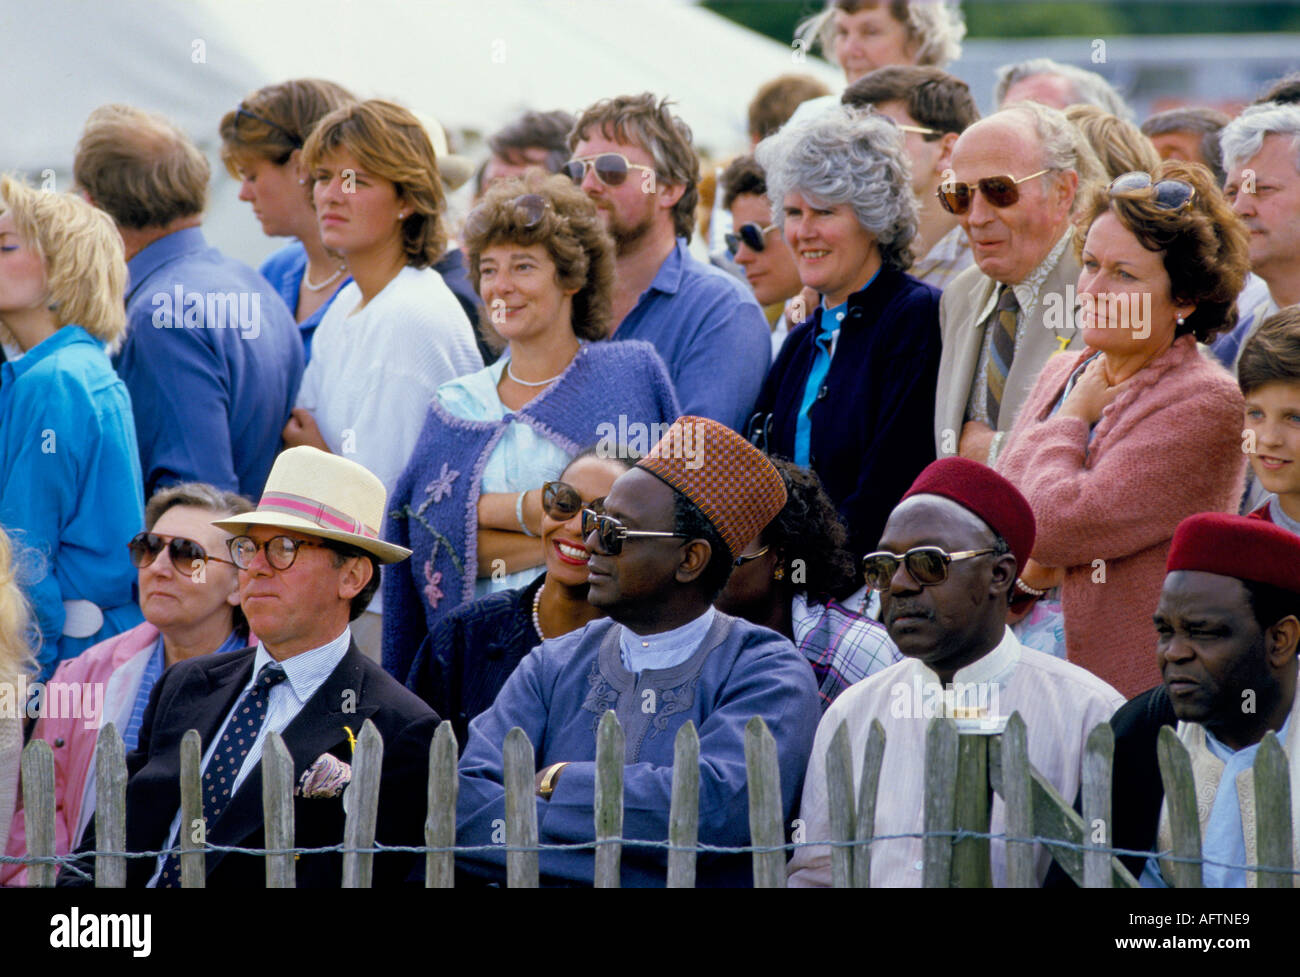 Multicultural group people watching polo game being played Cowdray Park Sussex Uk 1980s HOMER SYKES Stock Photo